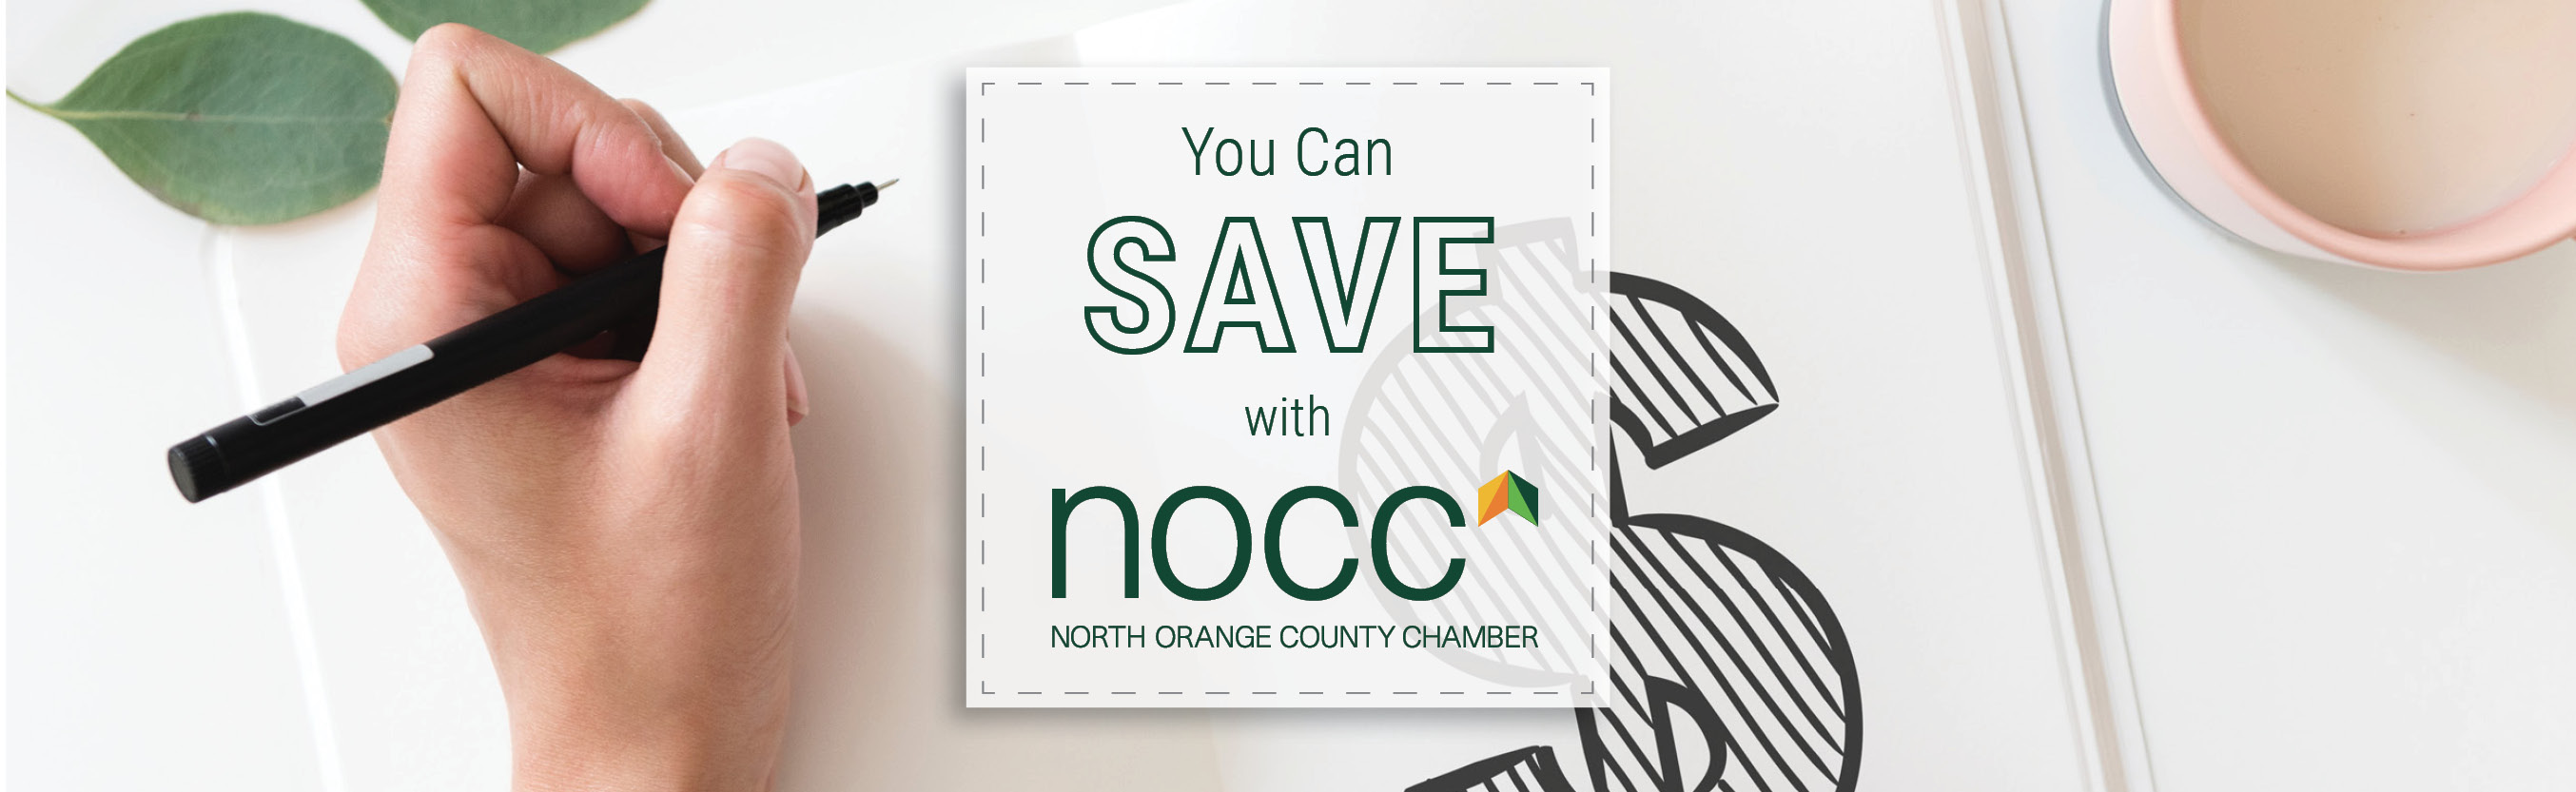 Save with NOCC